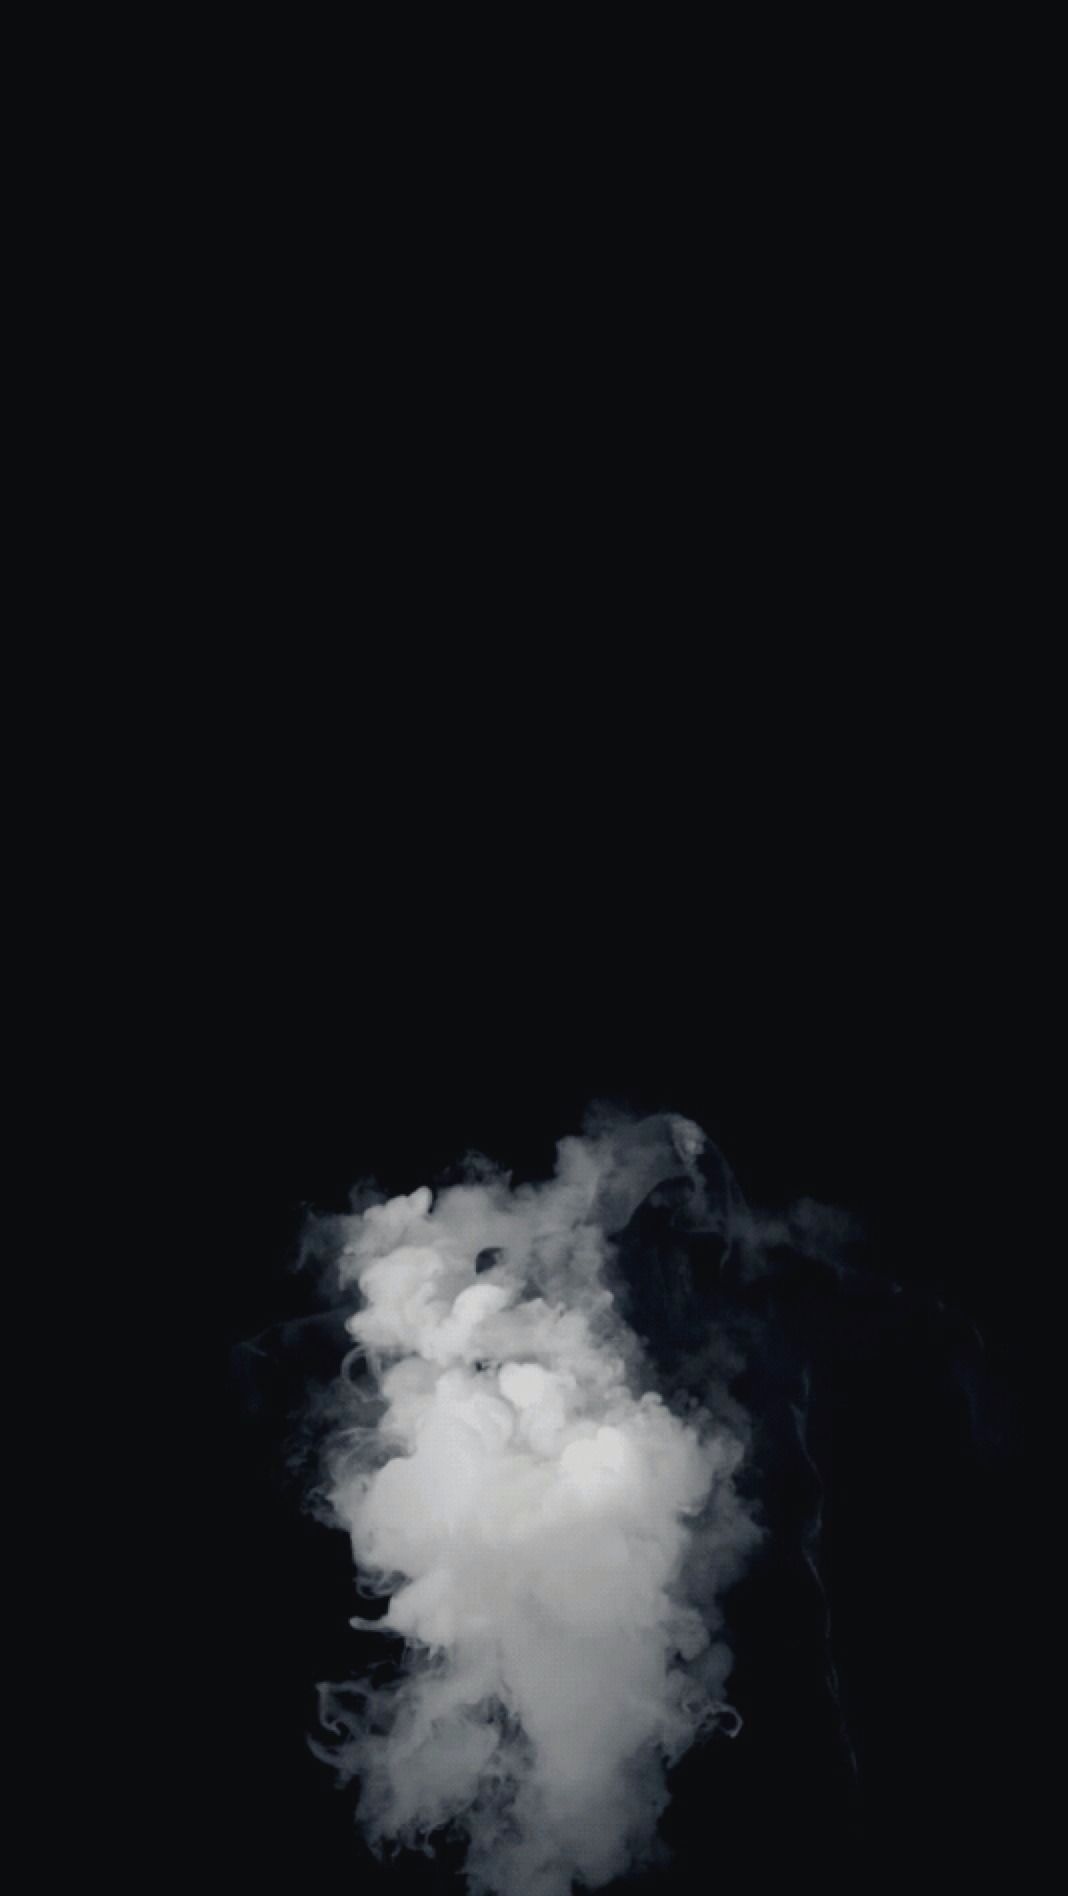 A dark background with a cloud of smoke in the center - Dark, black phone, iPhone, dark phone, black